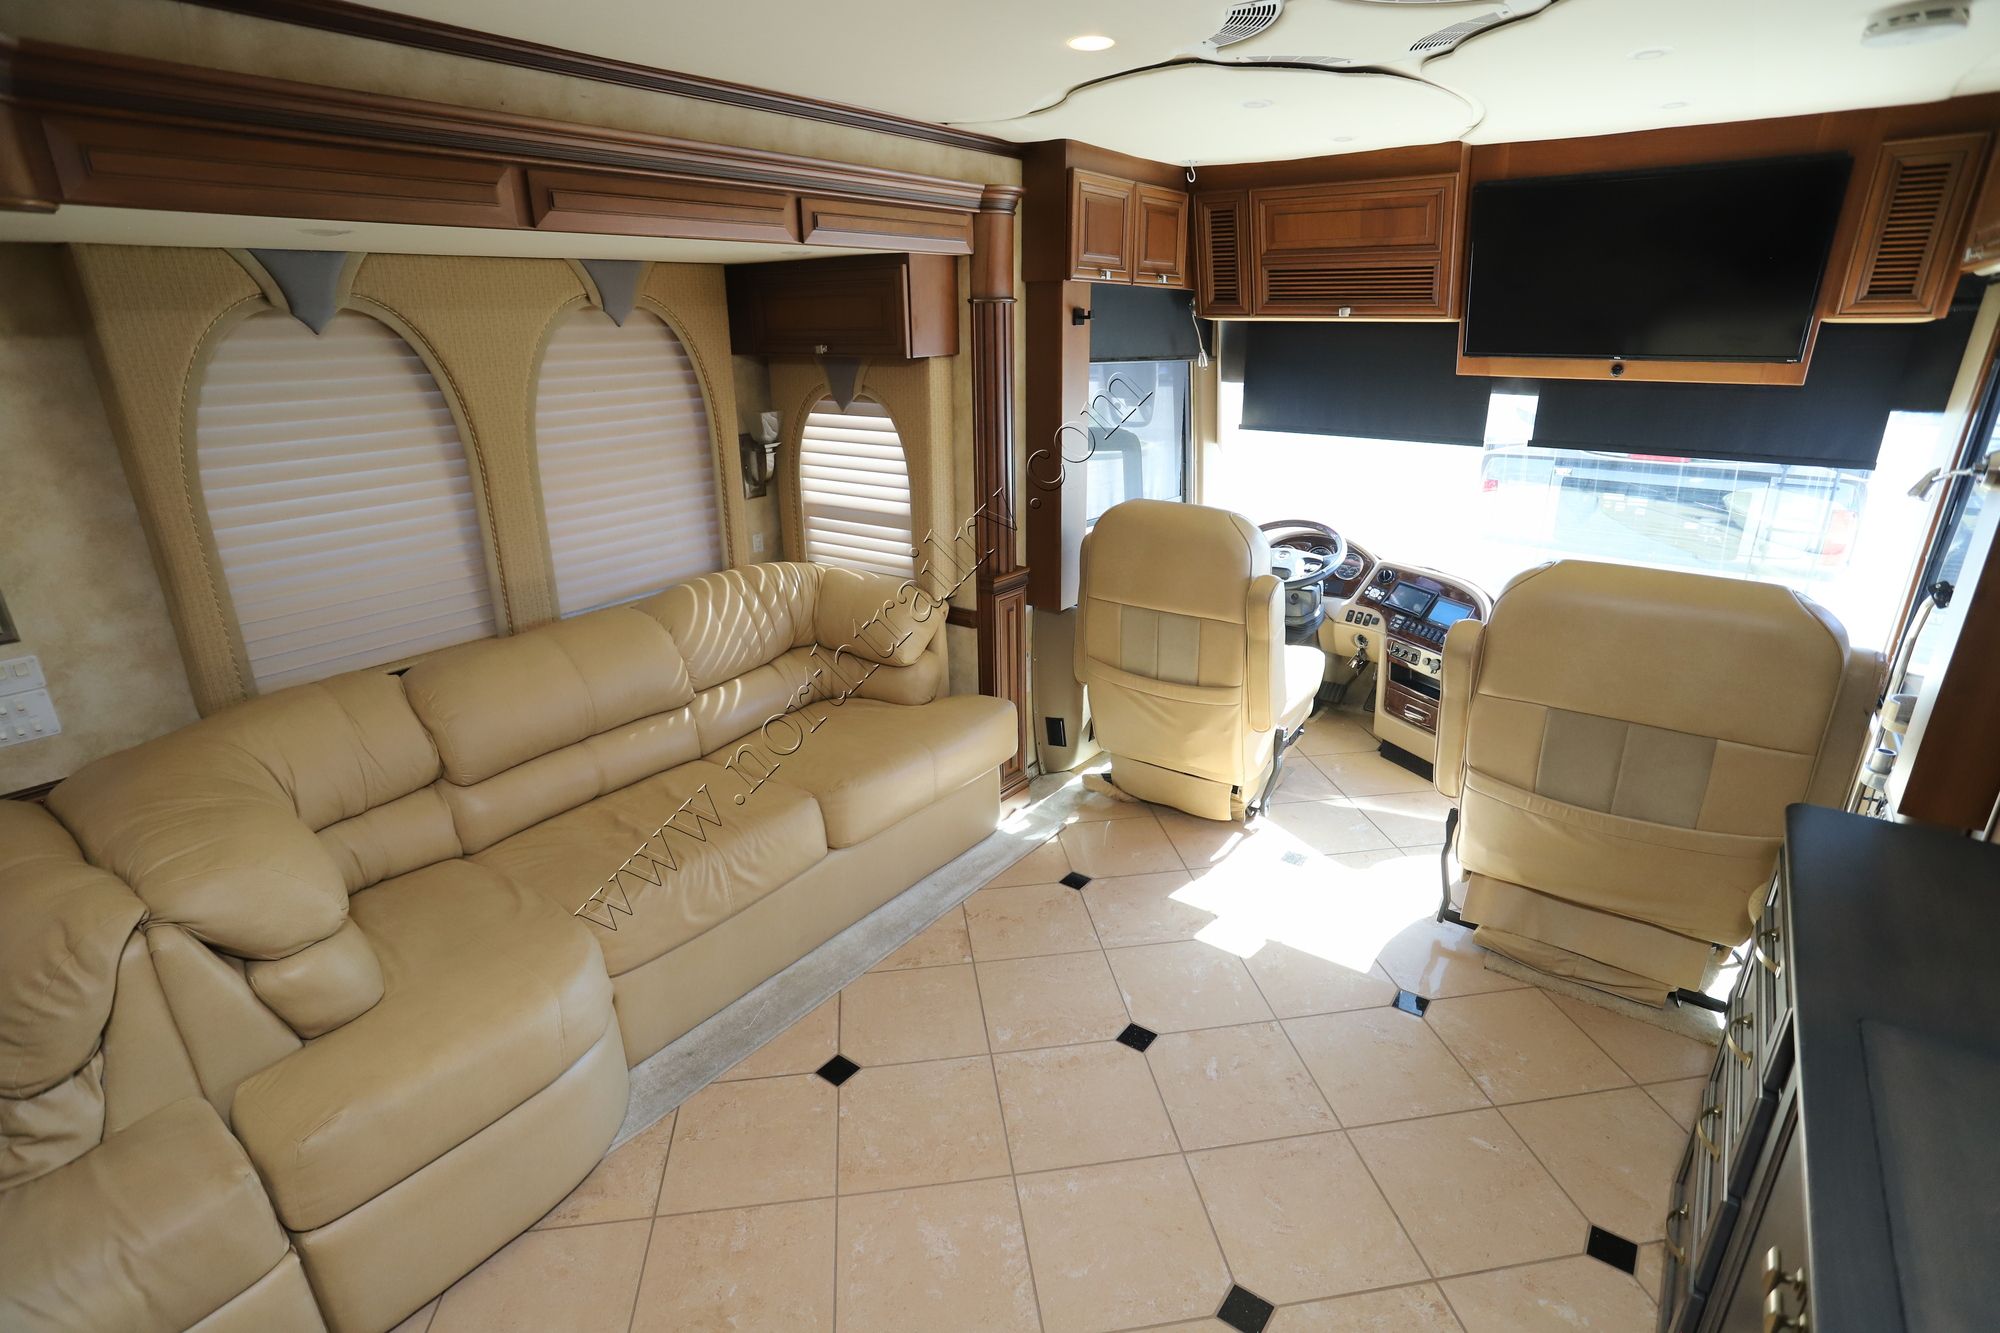 Used 2008 Newmar Essex 4508 Class A  For Sale